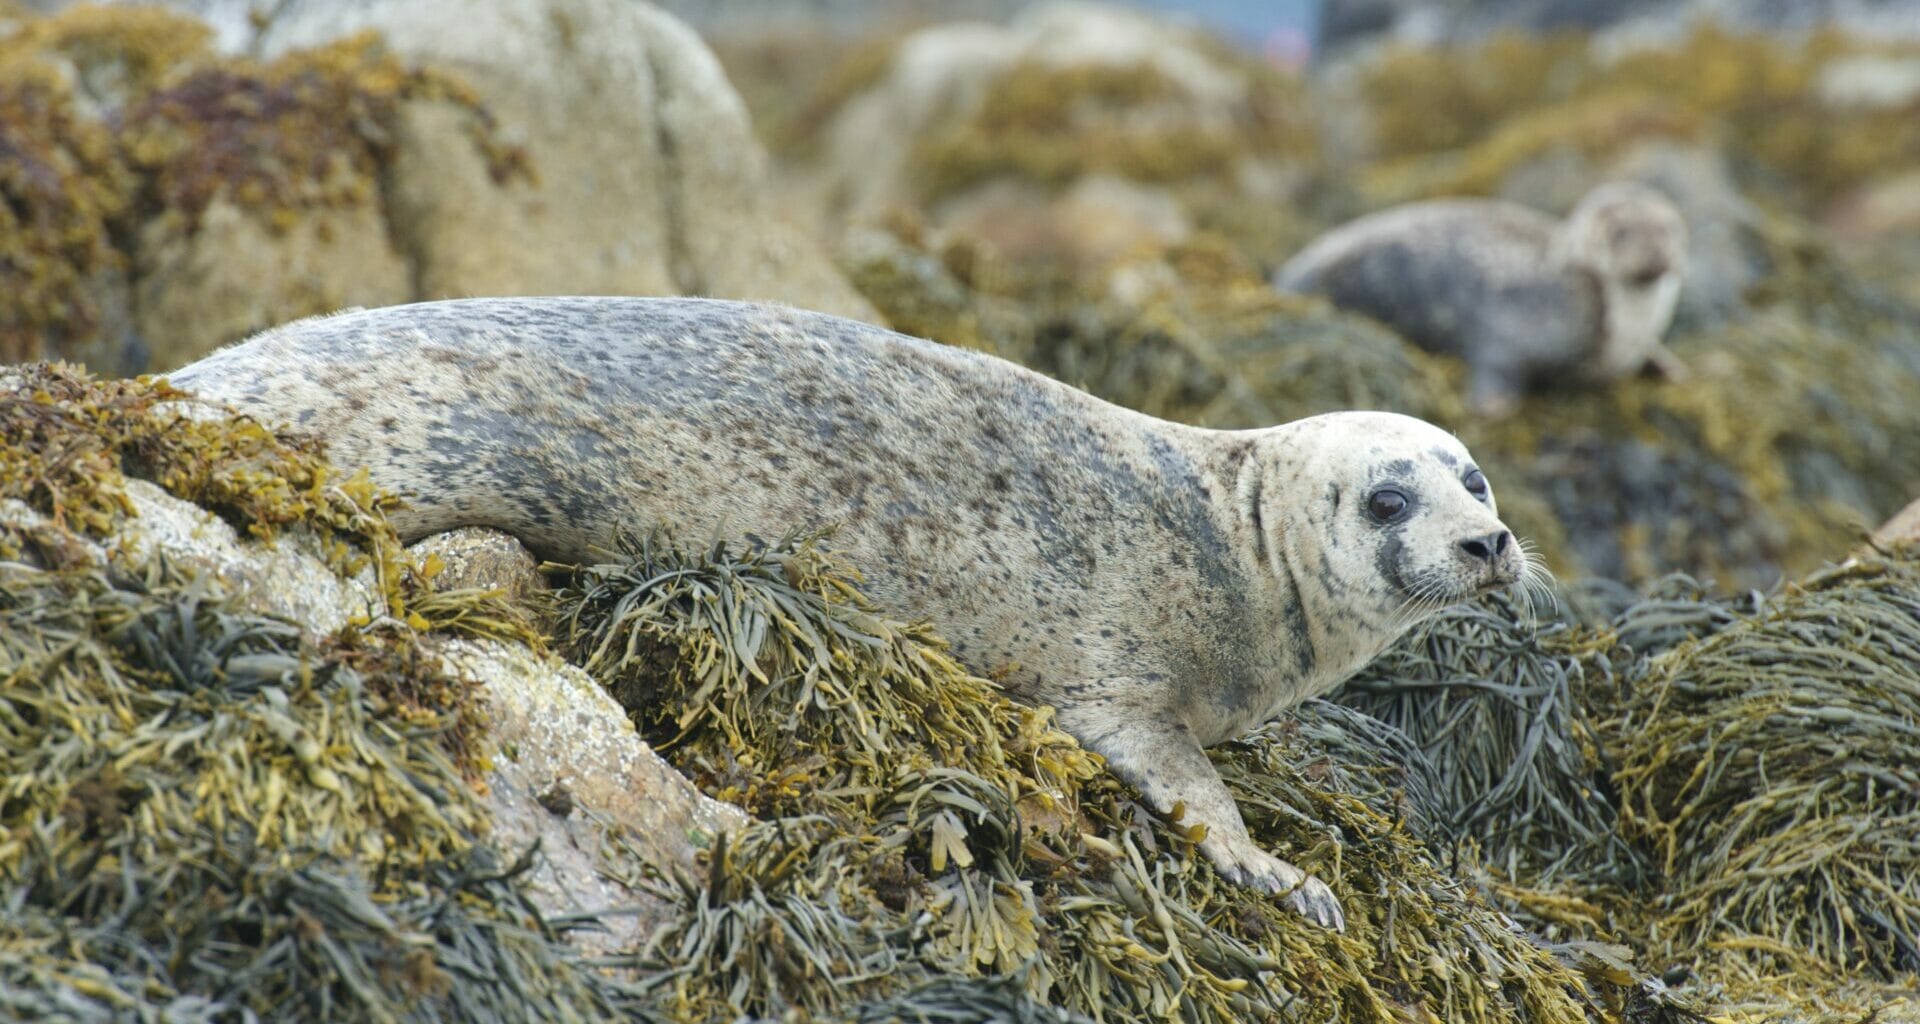 Marine protection: The Scottish species in decline 5